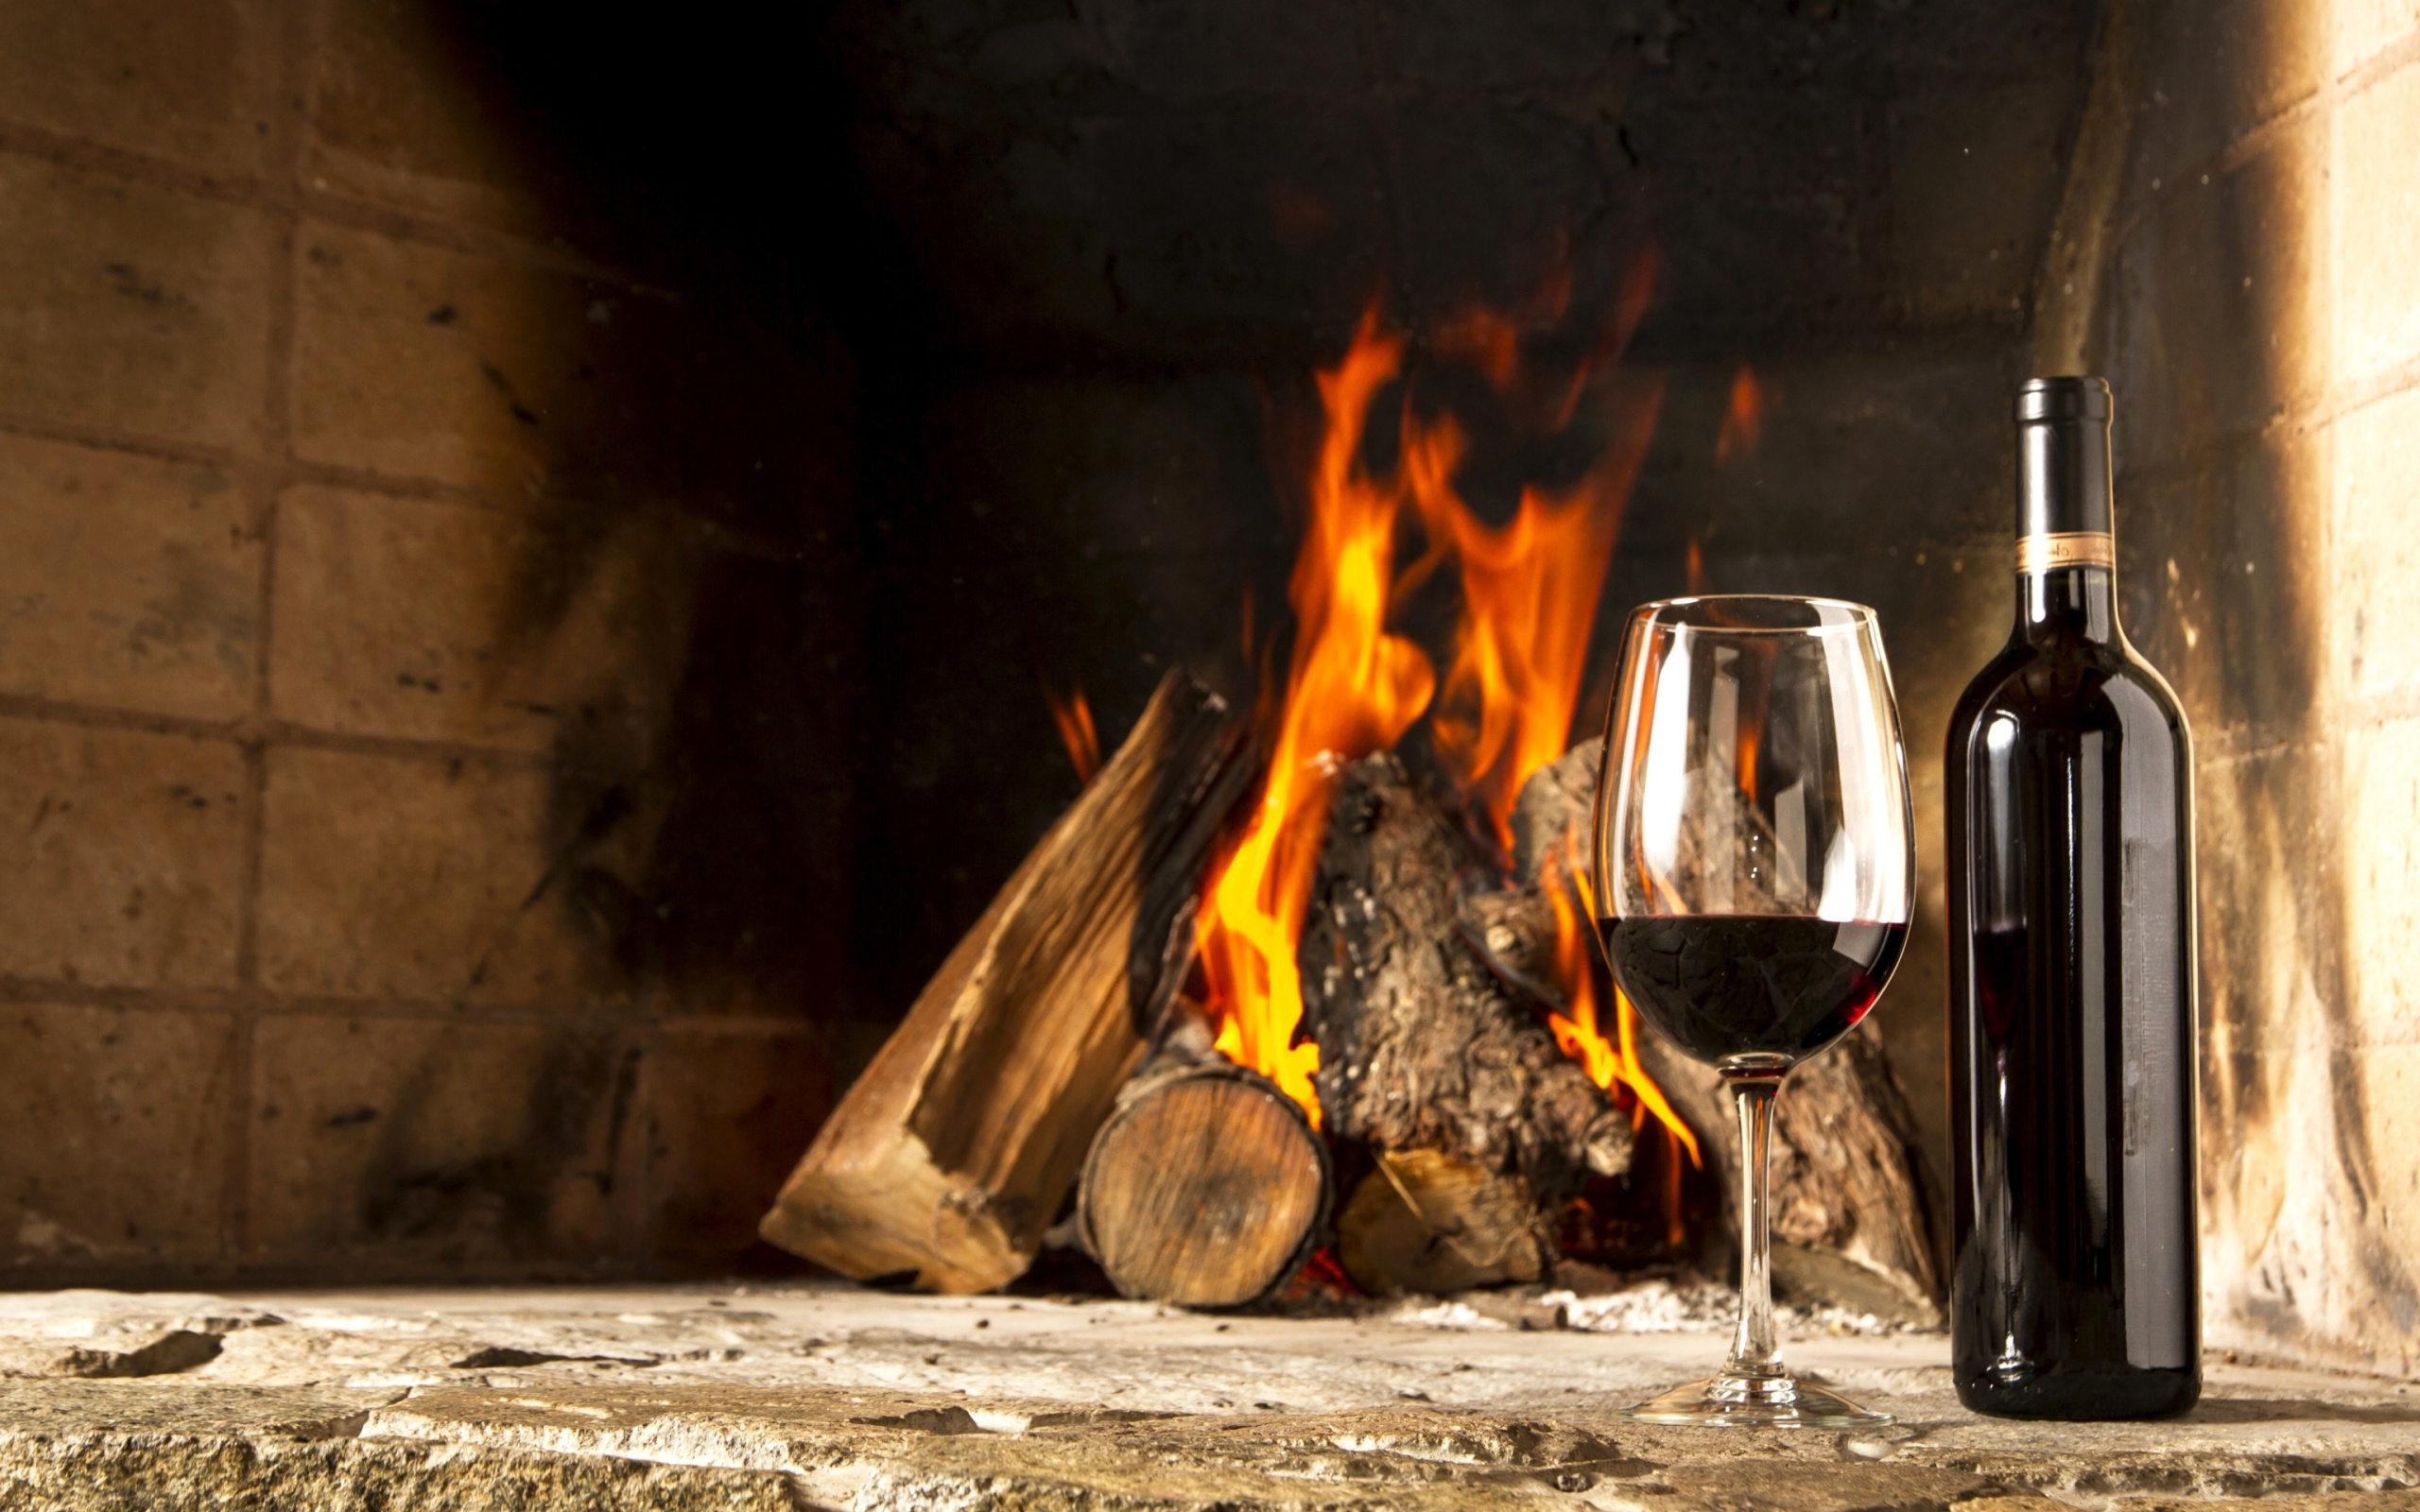 Das Wine and fireplace Wallpaper 2560x1600